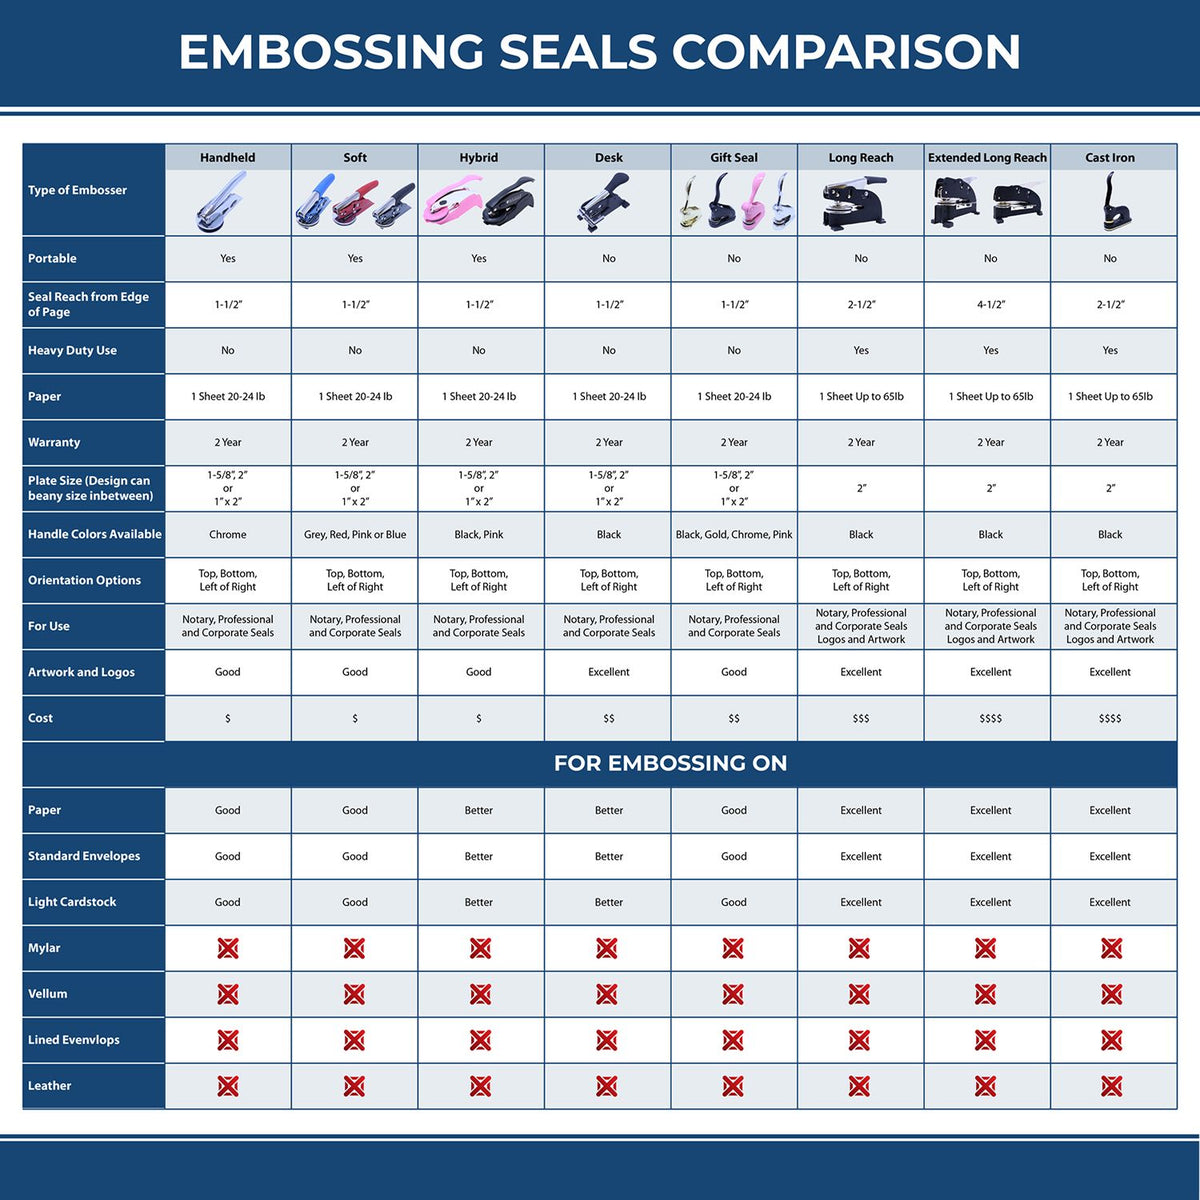 A comparison chart for the different types of mount models available for the Heavy Duty Cast Iron Louisiana Architect Embosser.